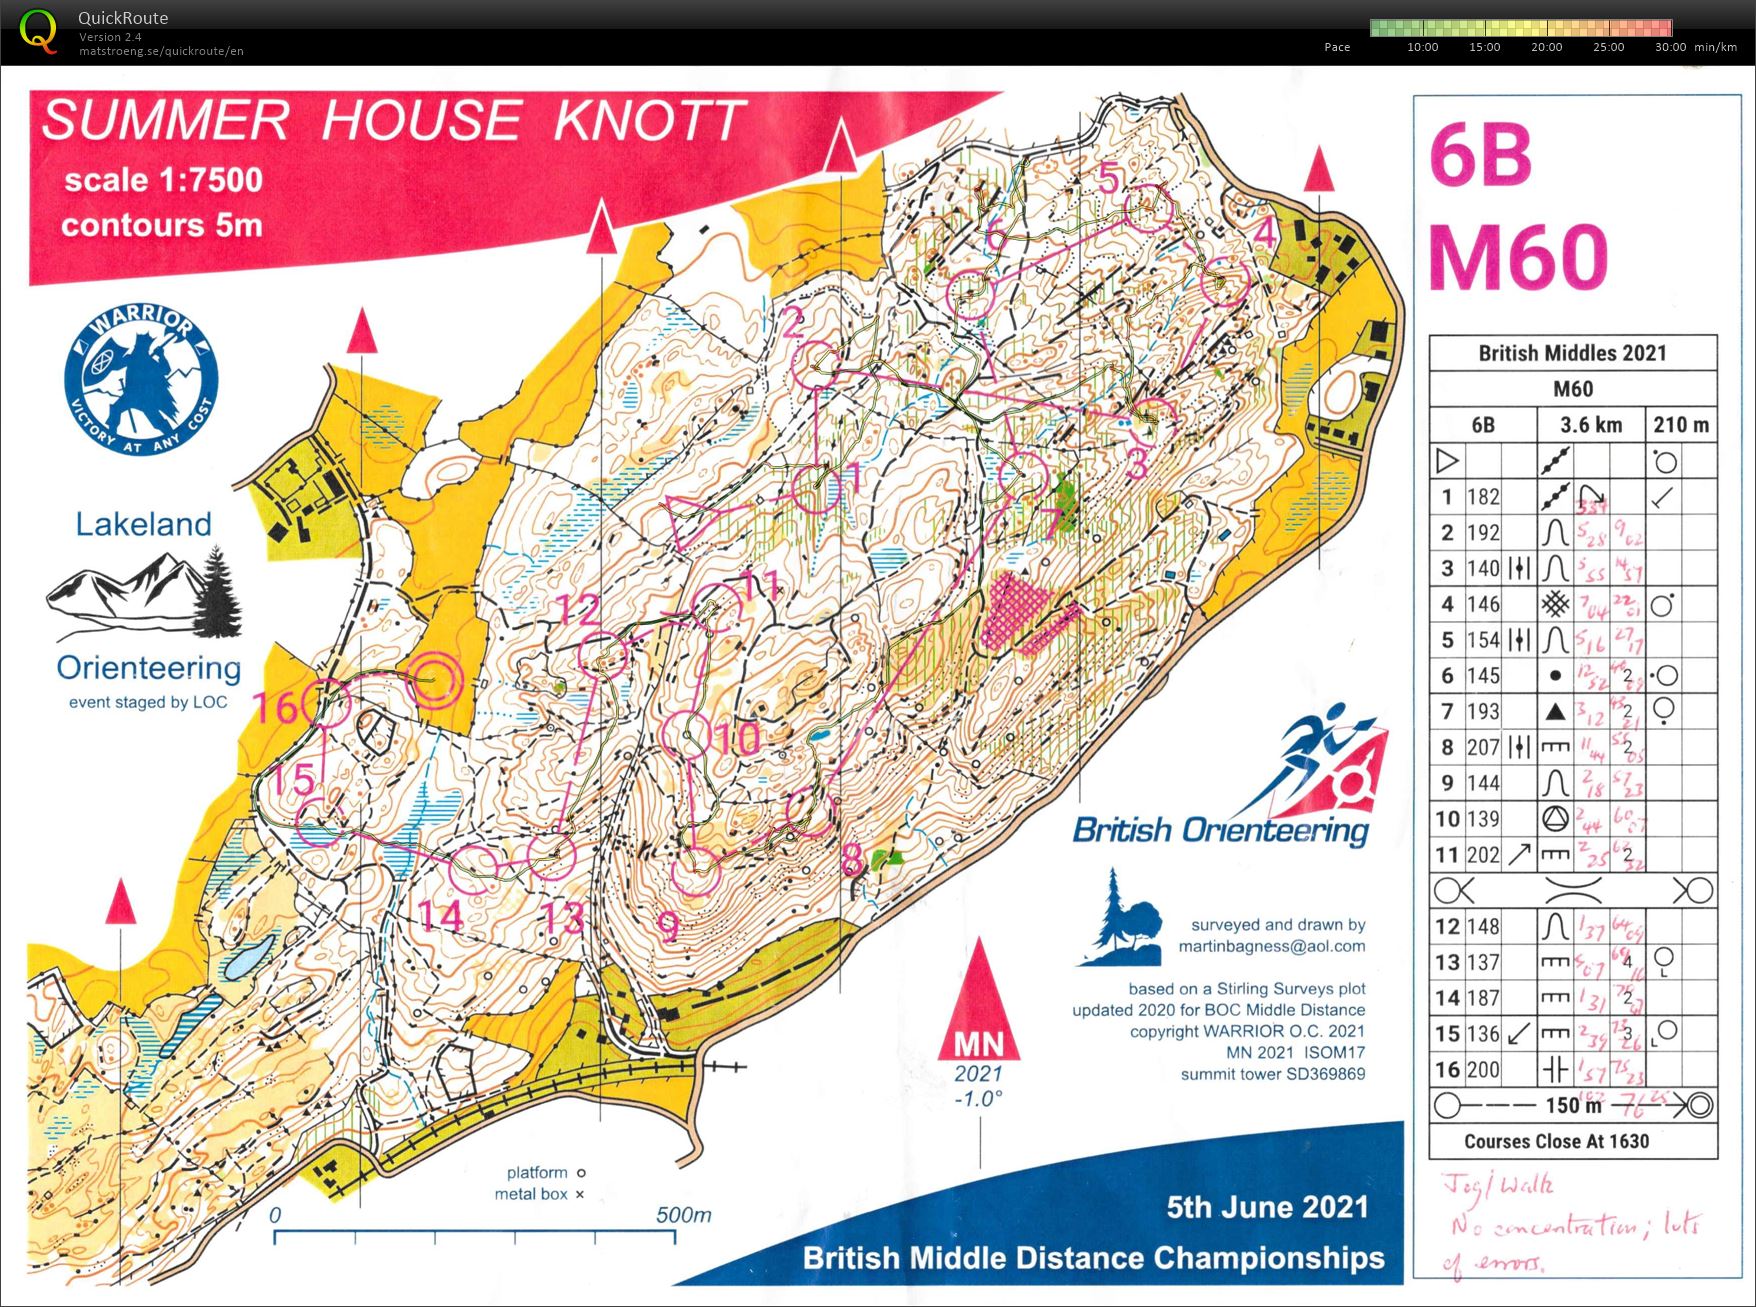 British Middle Distance Championships H60 (05-06-2021)